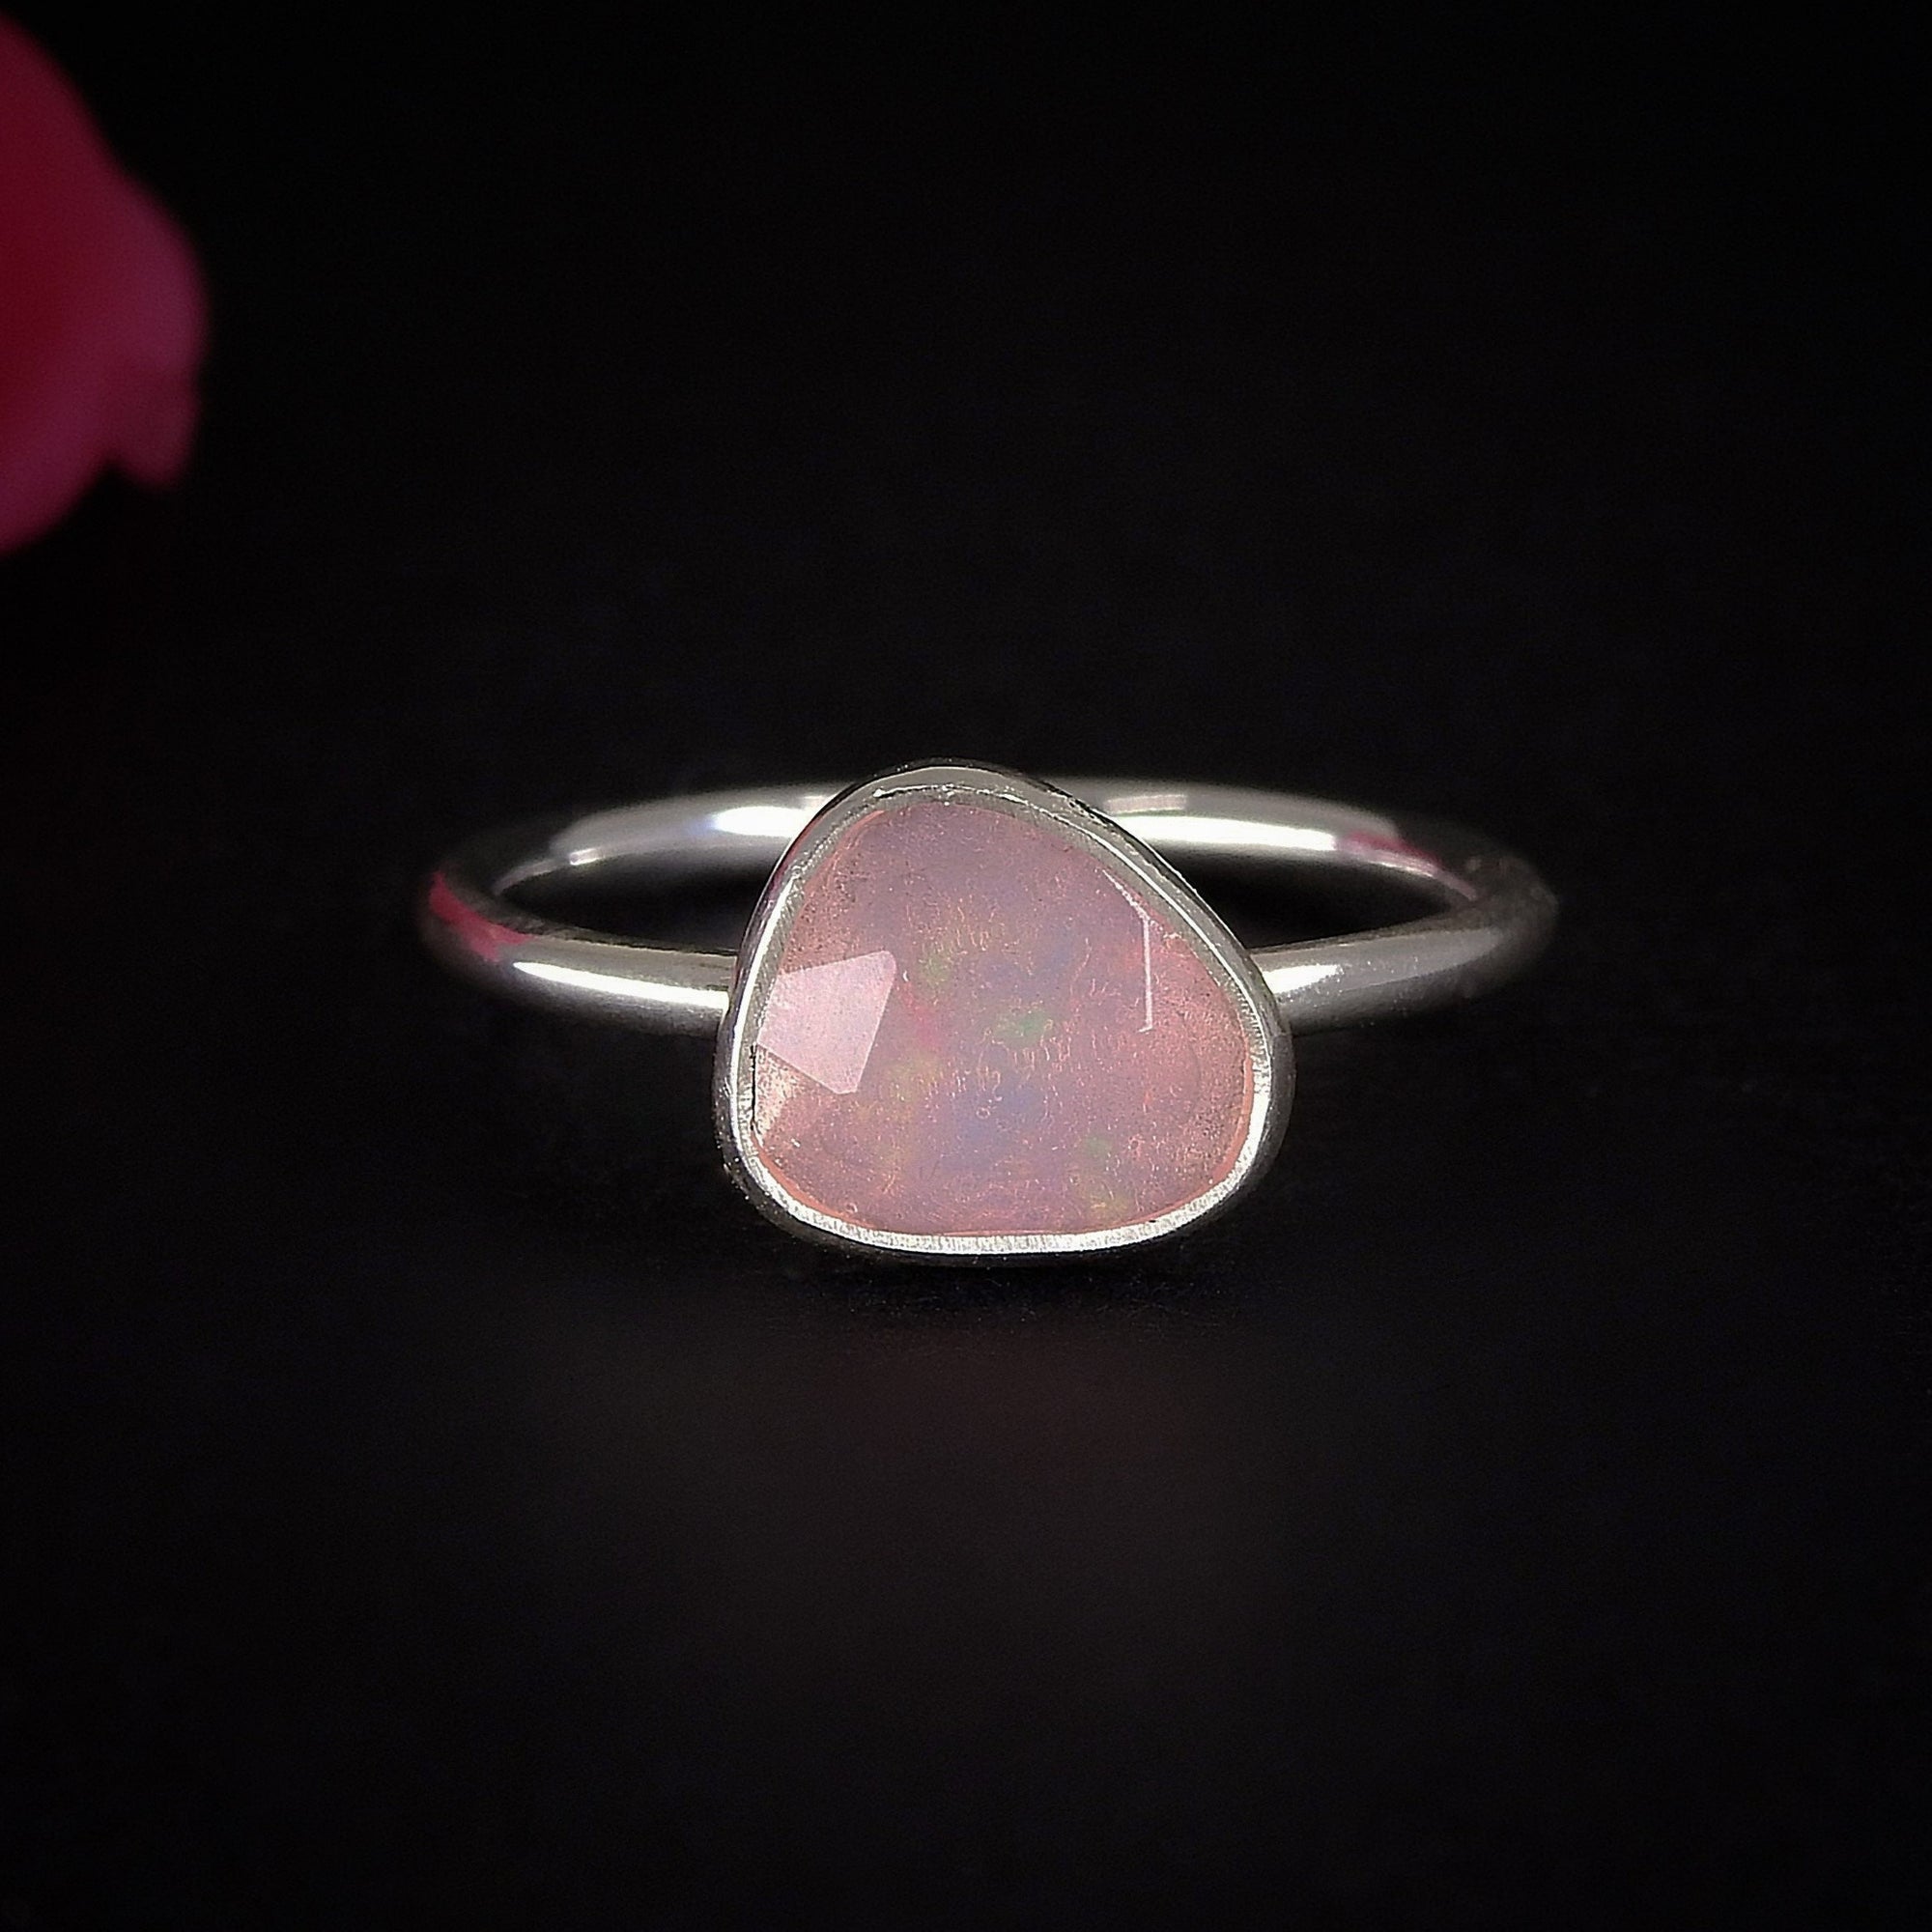 Rose Cut Pink Opal Ring - Size 6 - Sterling Silver - Ethiopian Opal Ring - Dainty Opal Jewellery - Faceted Opal Jewelry, Handcrafted OOAK